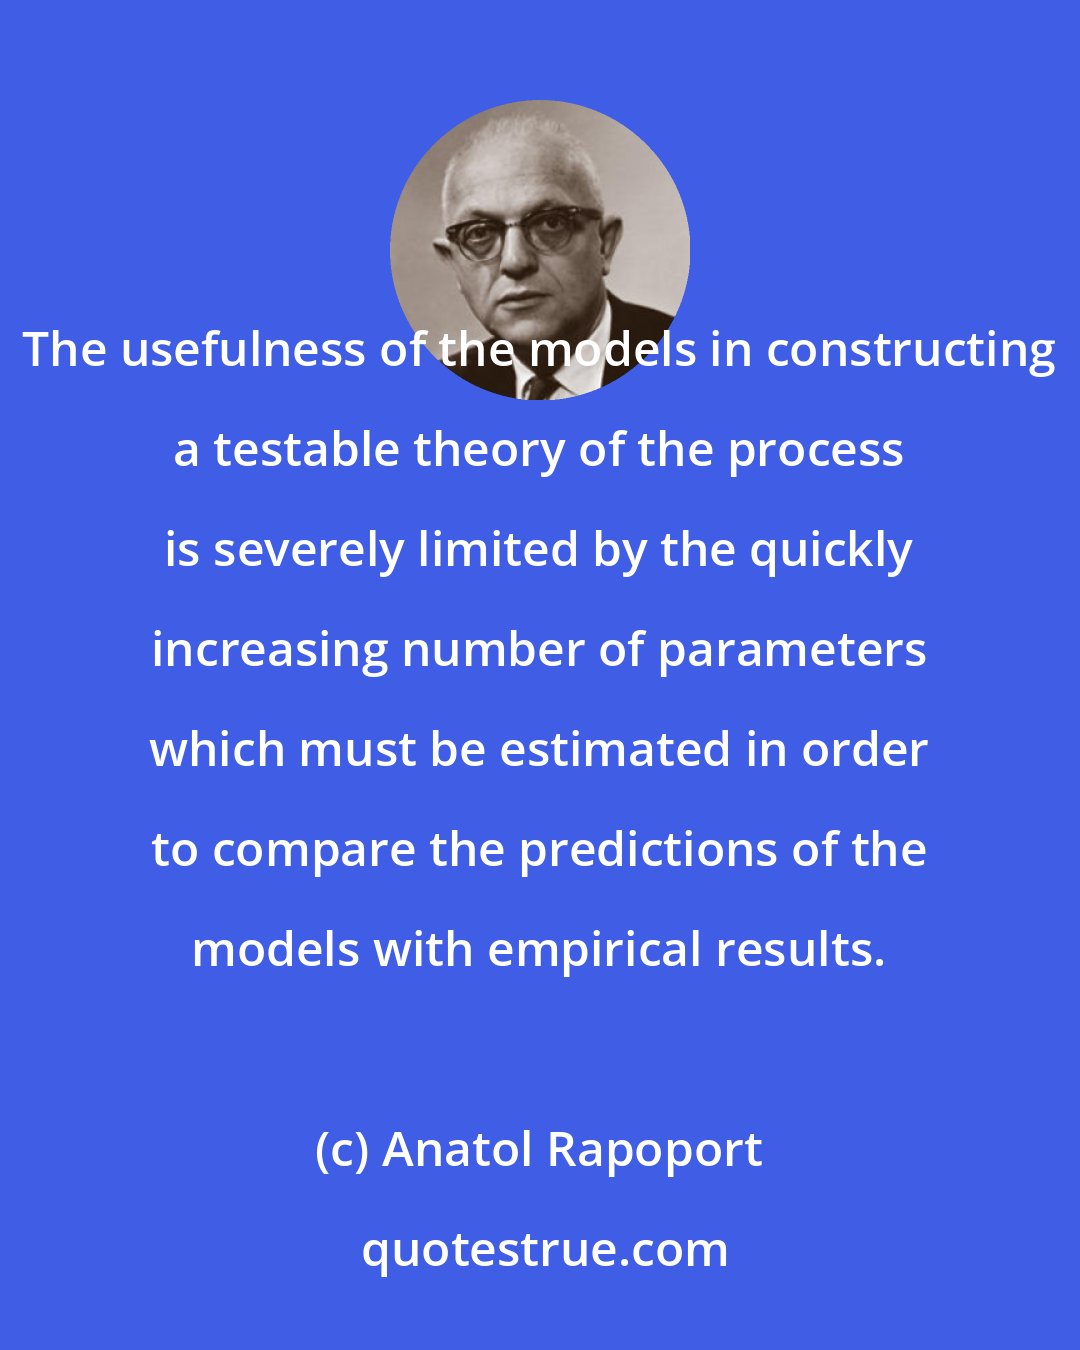 Anatol Rapoport: The usefulness of the models in constructing a testable theory of the process is severely limited by the quickly increasing number of parameters which must be estimated in order to compare the predictions of the models with empirical results.